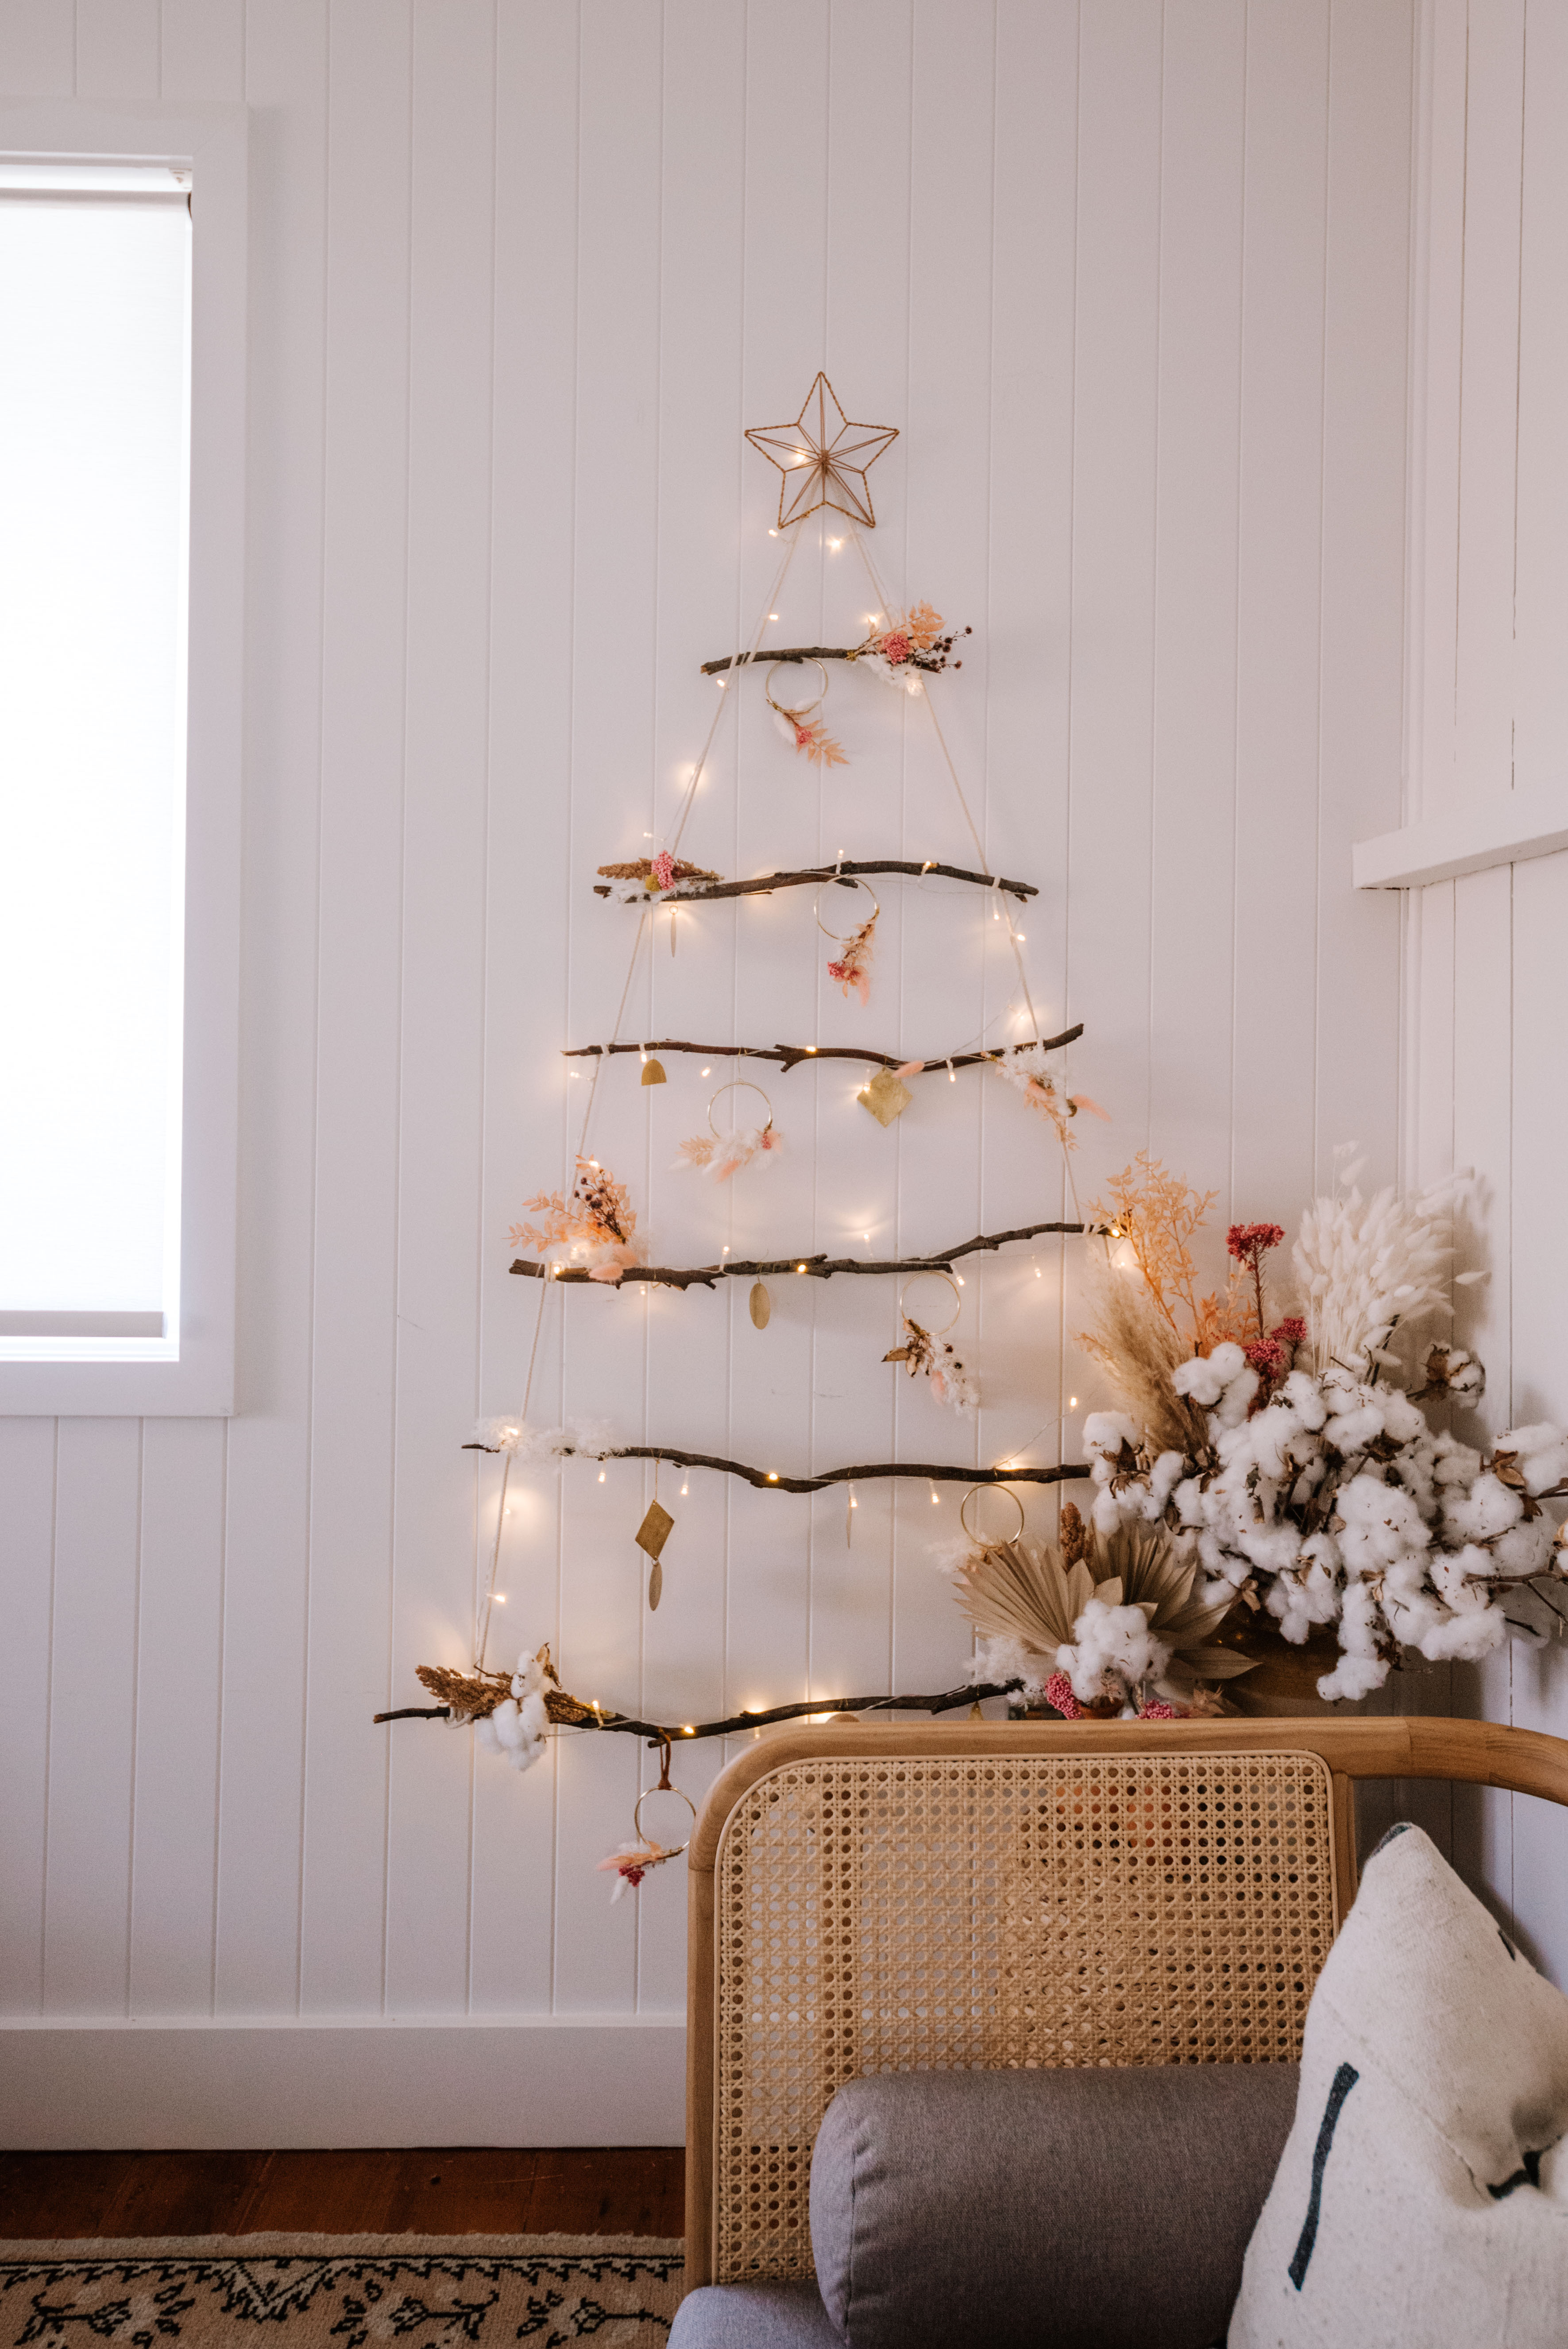 This Year’s DIY Branch Christmas Tree! | a pair & a spare | Bloglovin’